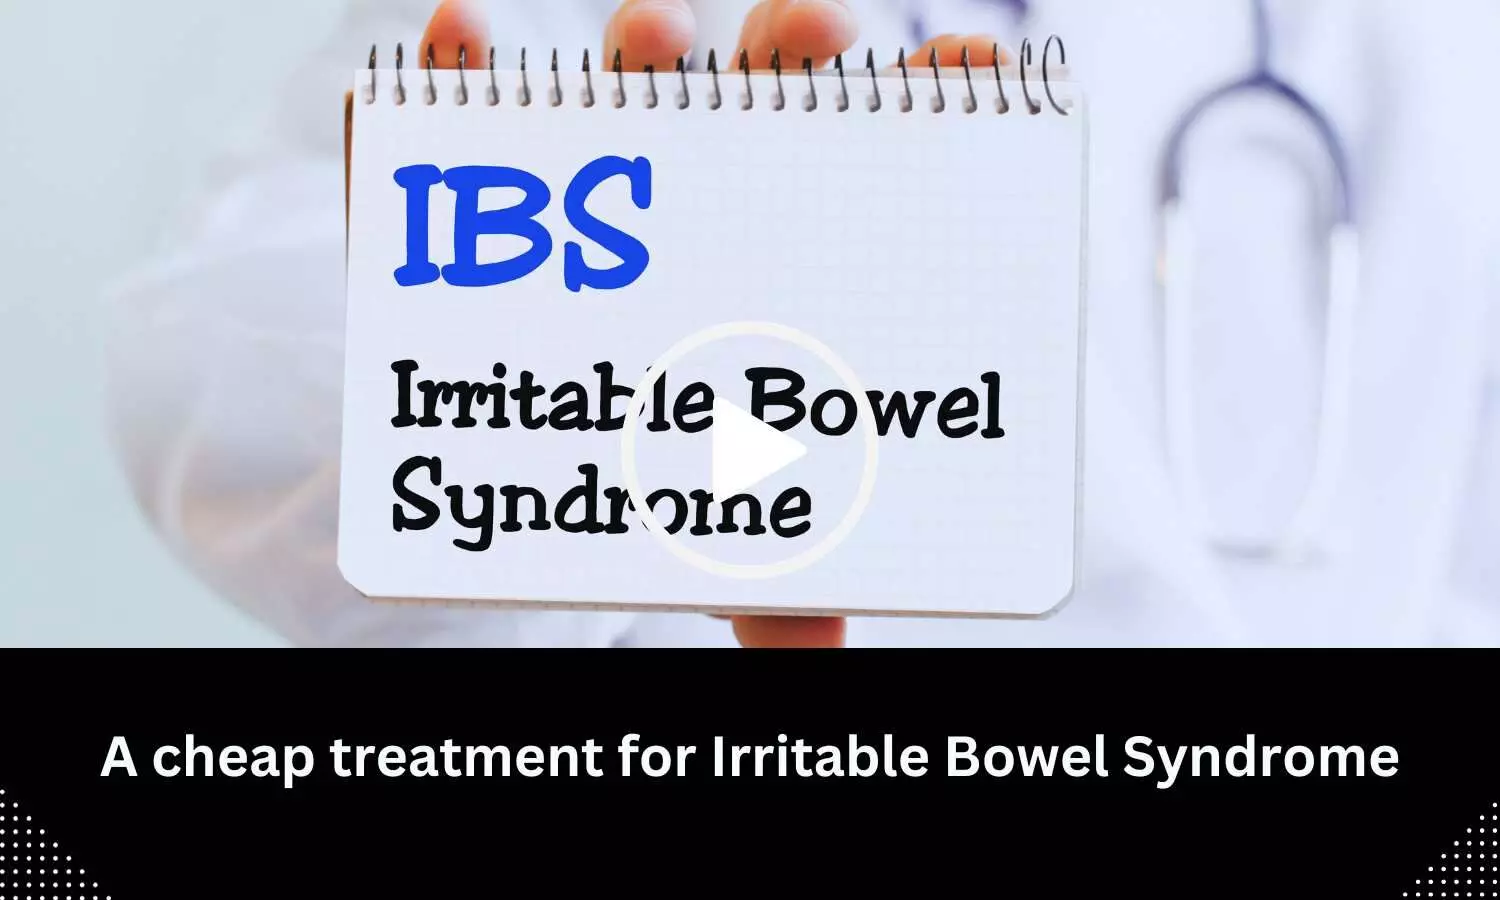 A cheap treatment for Irritable Bowel Syndrome